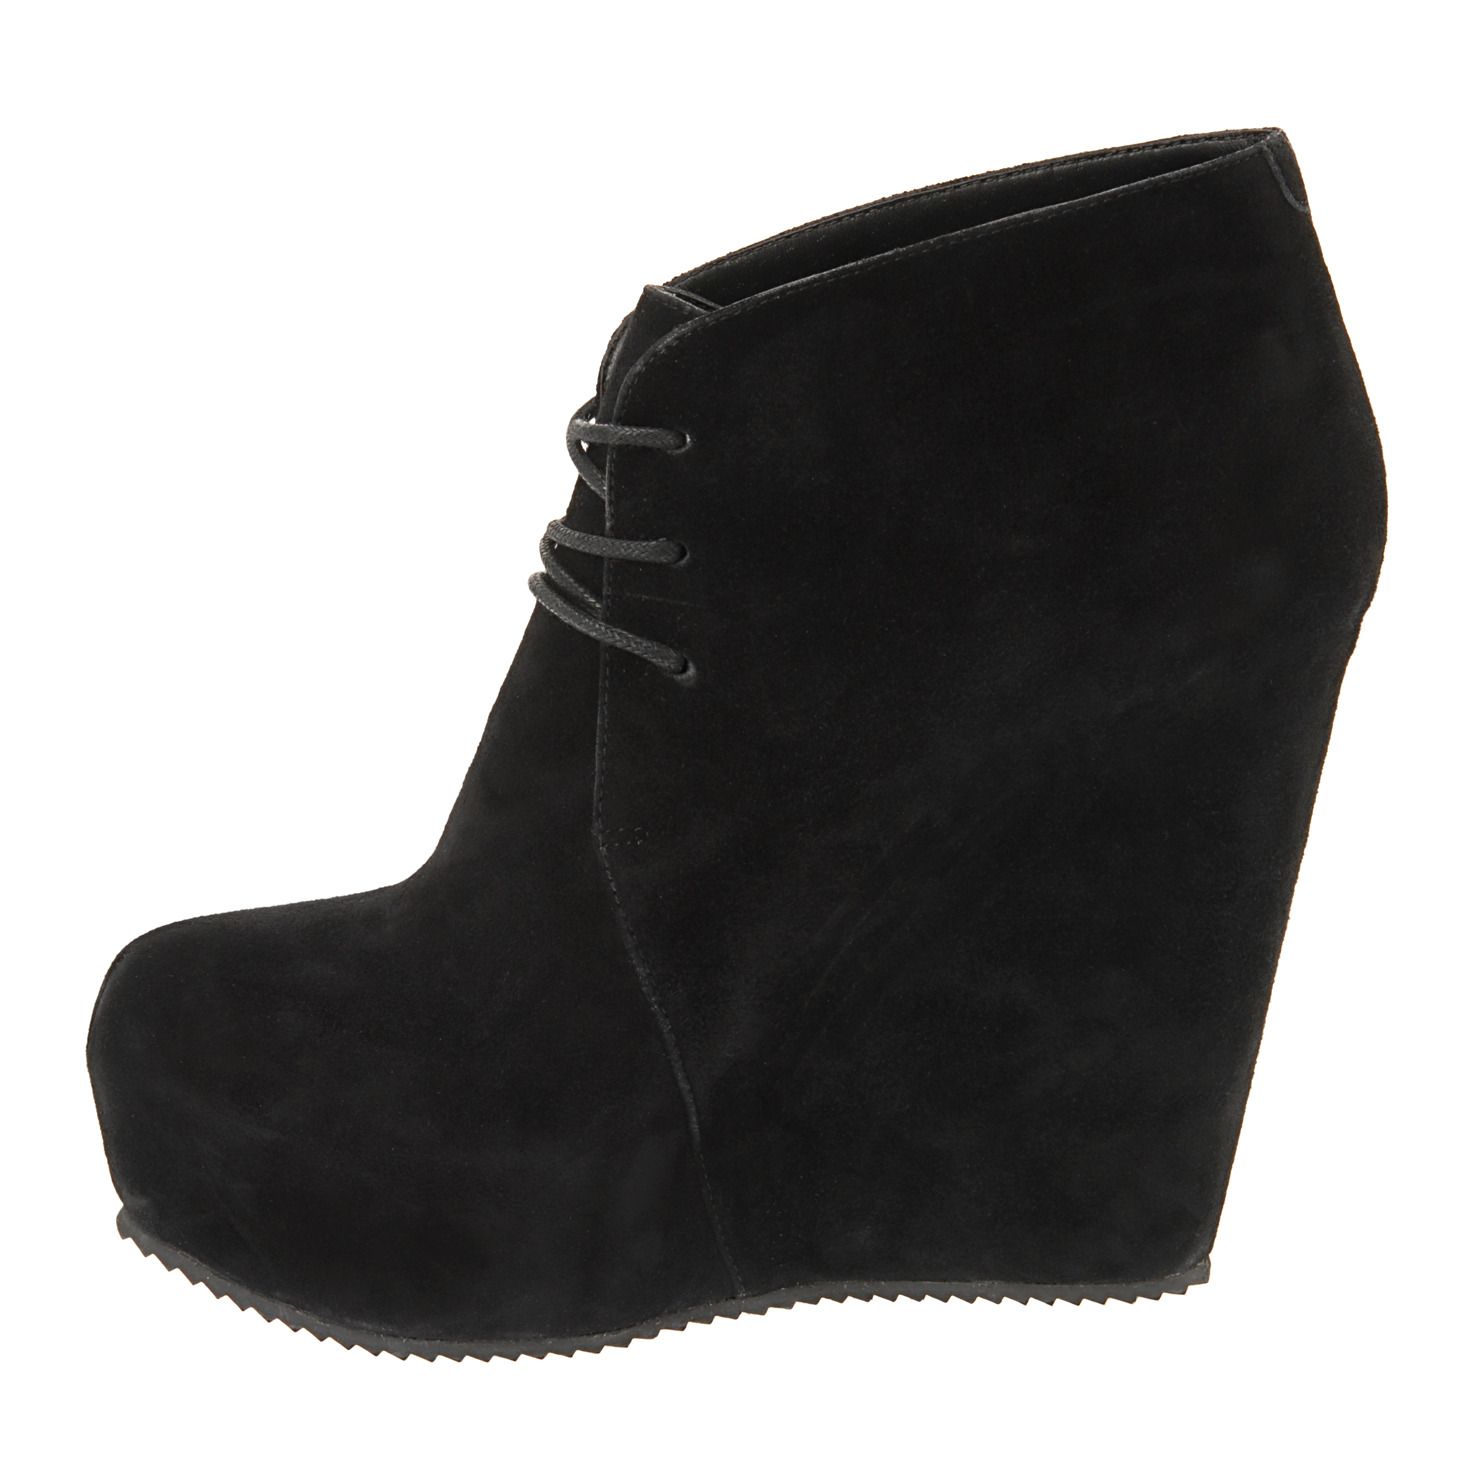 What Charly Wants: My New Winter Wedges